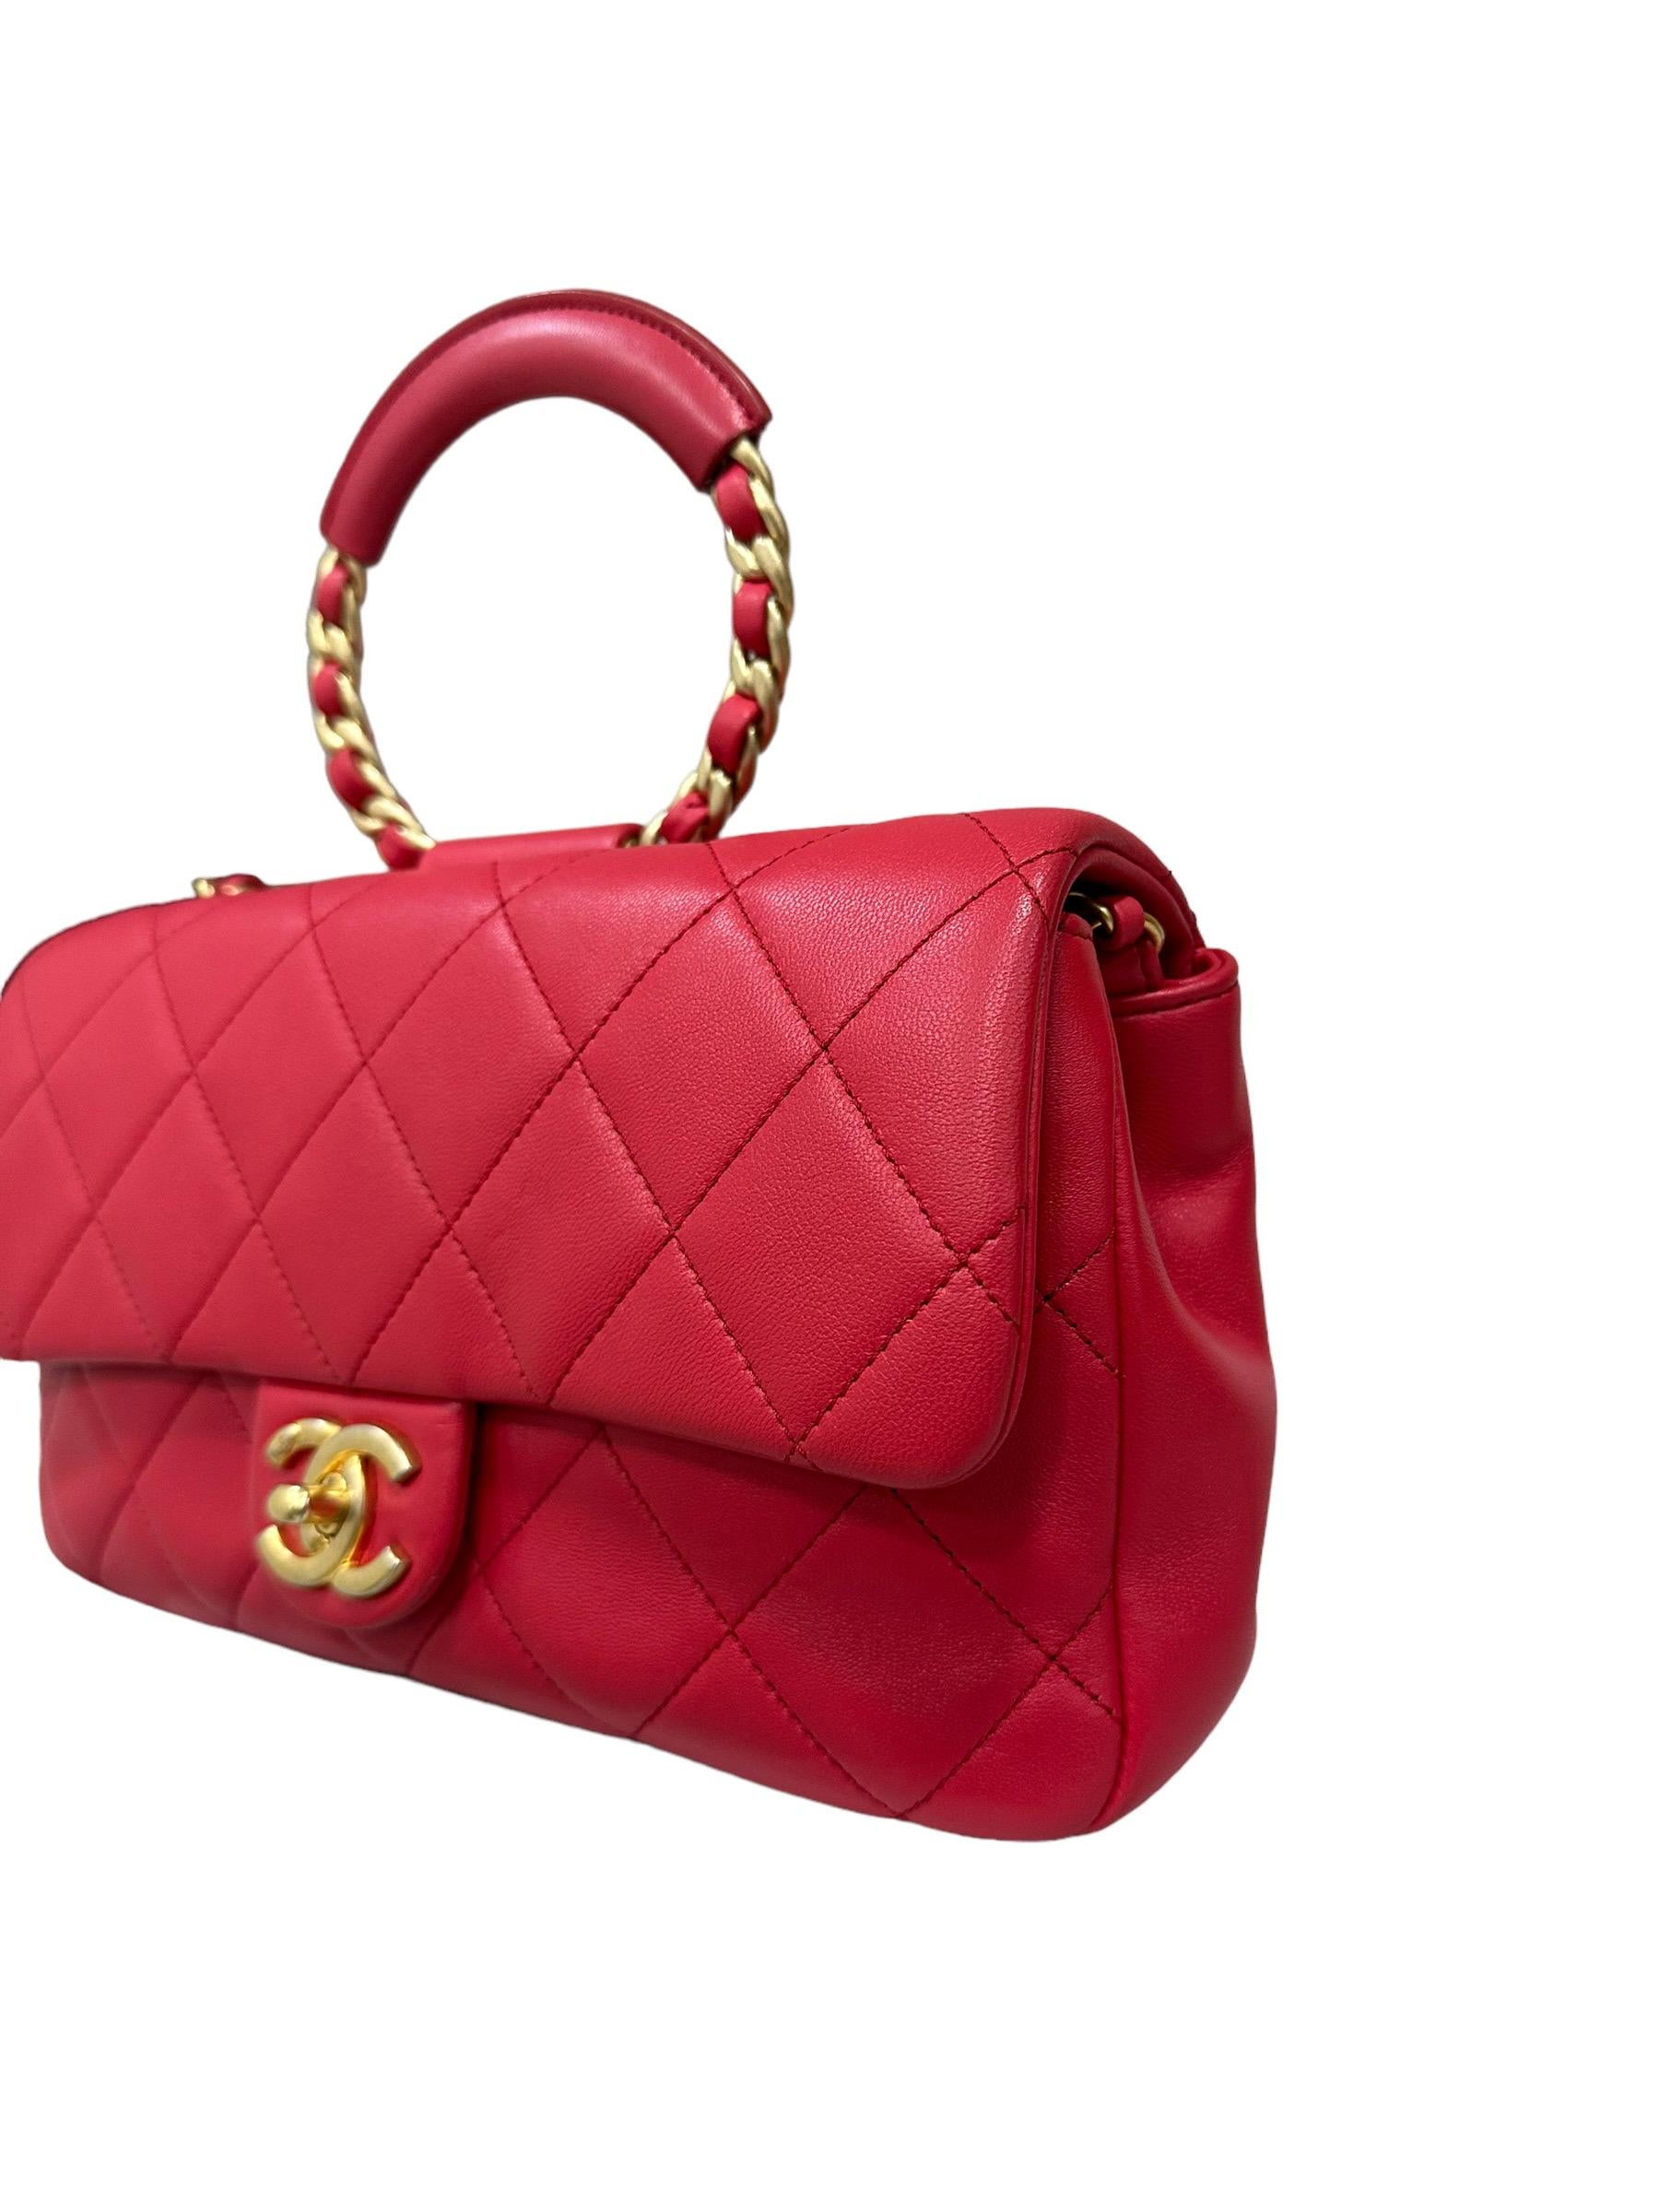 Red Borsa A Tracolla Chanel Circle Handle Pelle Liscia Rossa 2019 For Sale